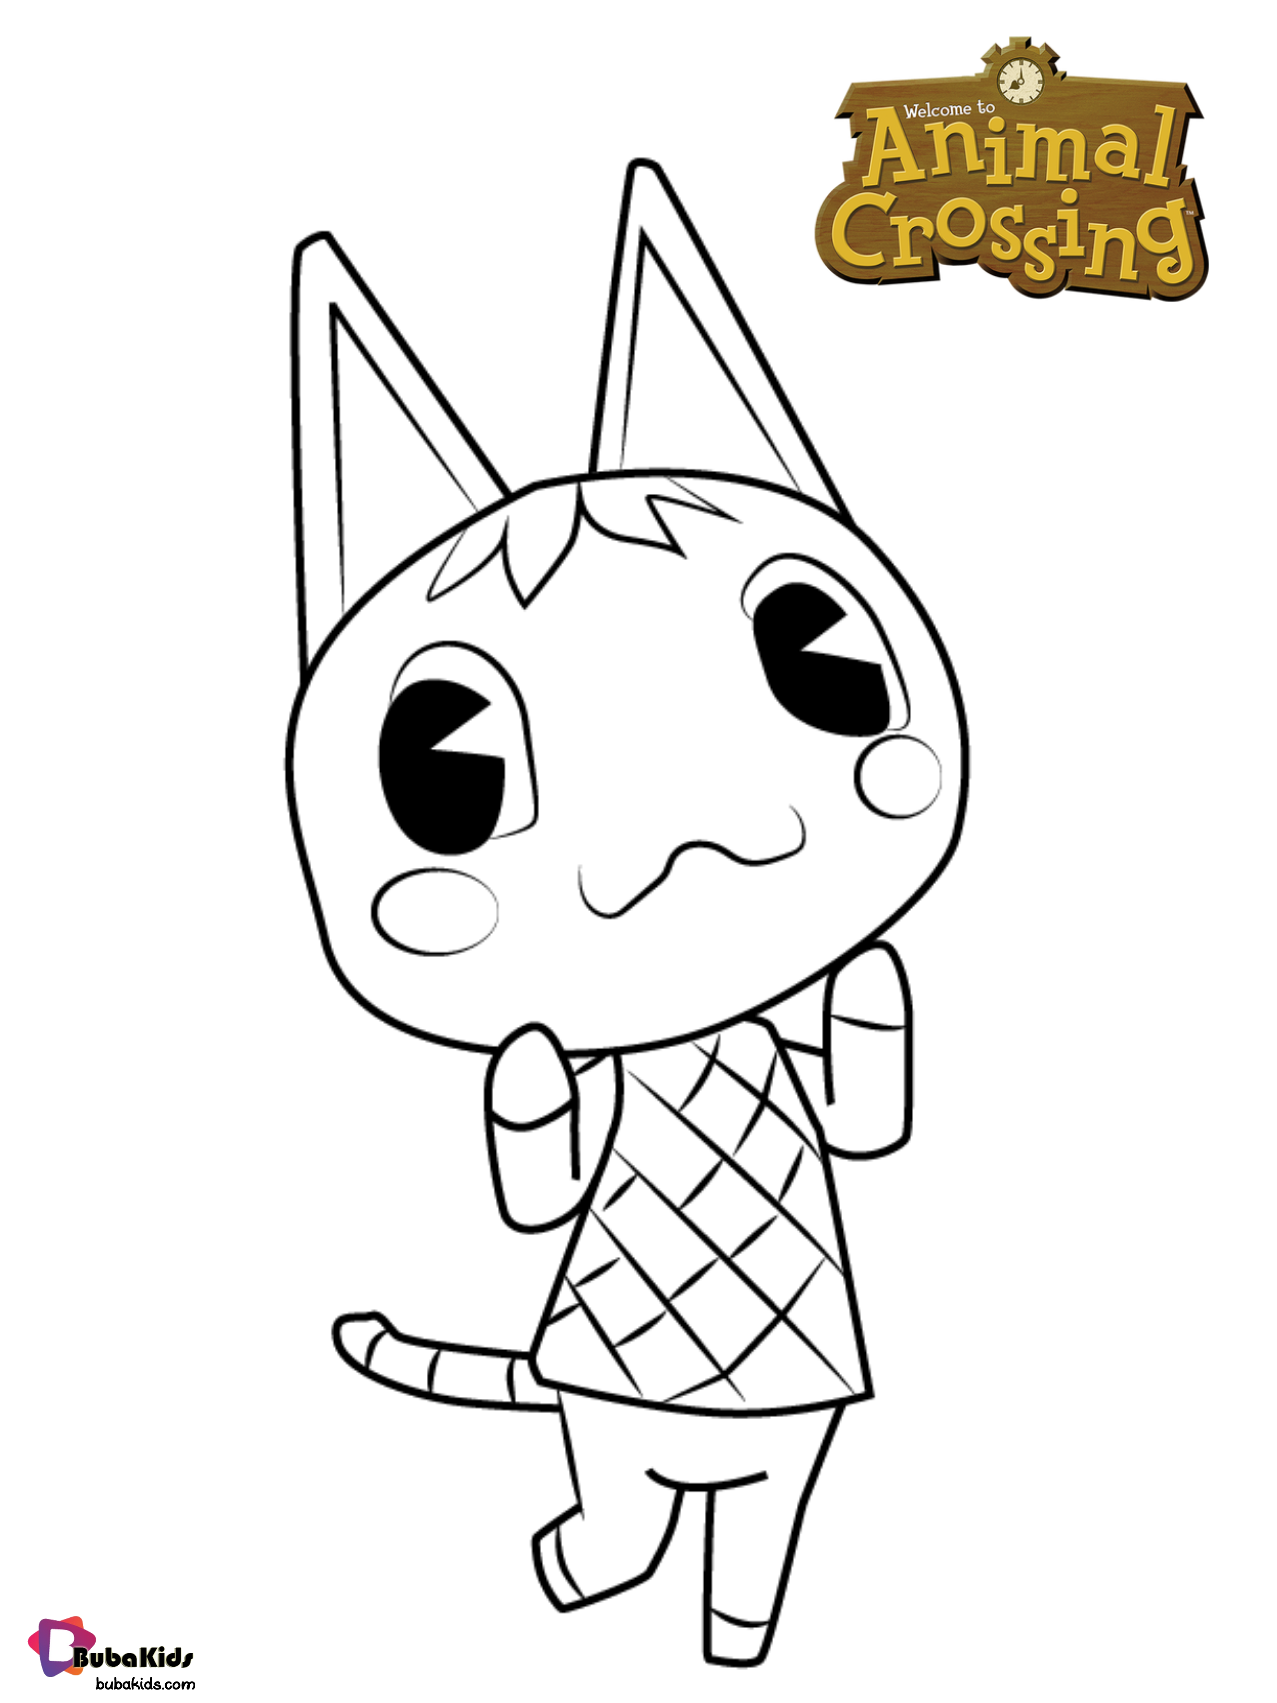 Printable coloring picture  Rosie Animal Crossing character coloring page Wallpaper